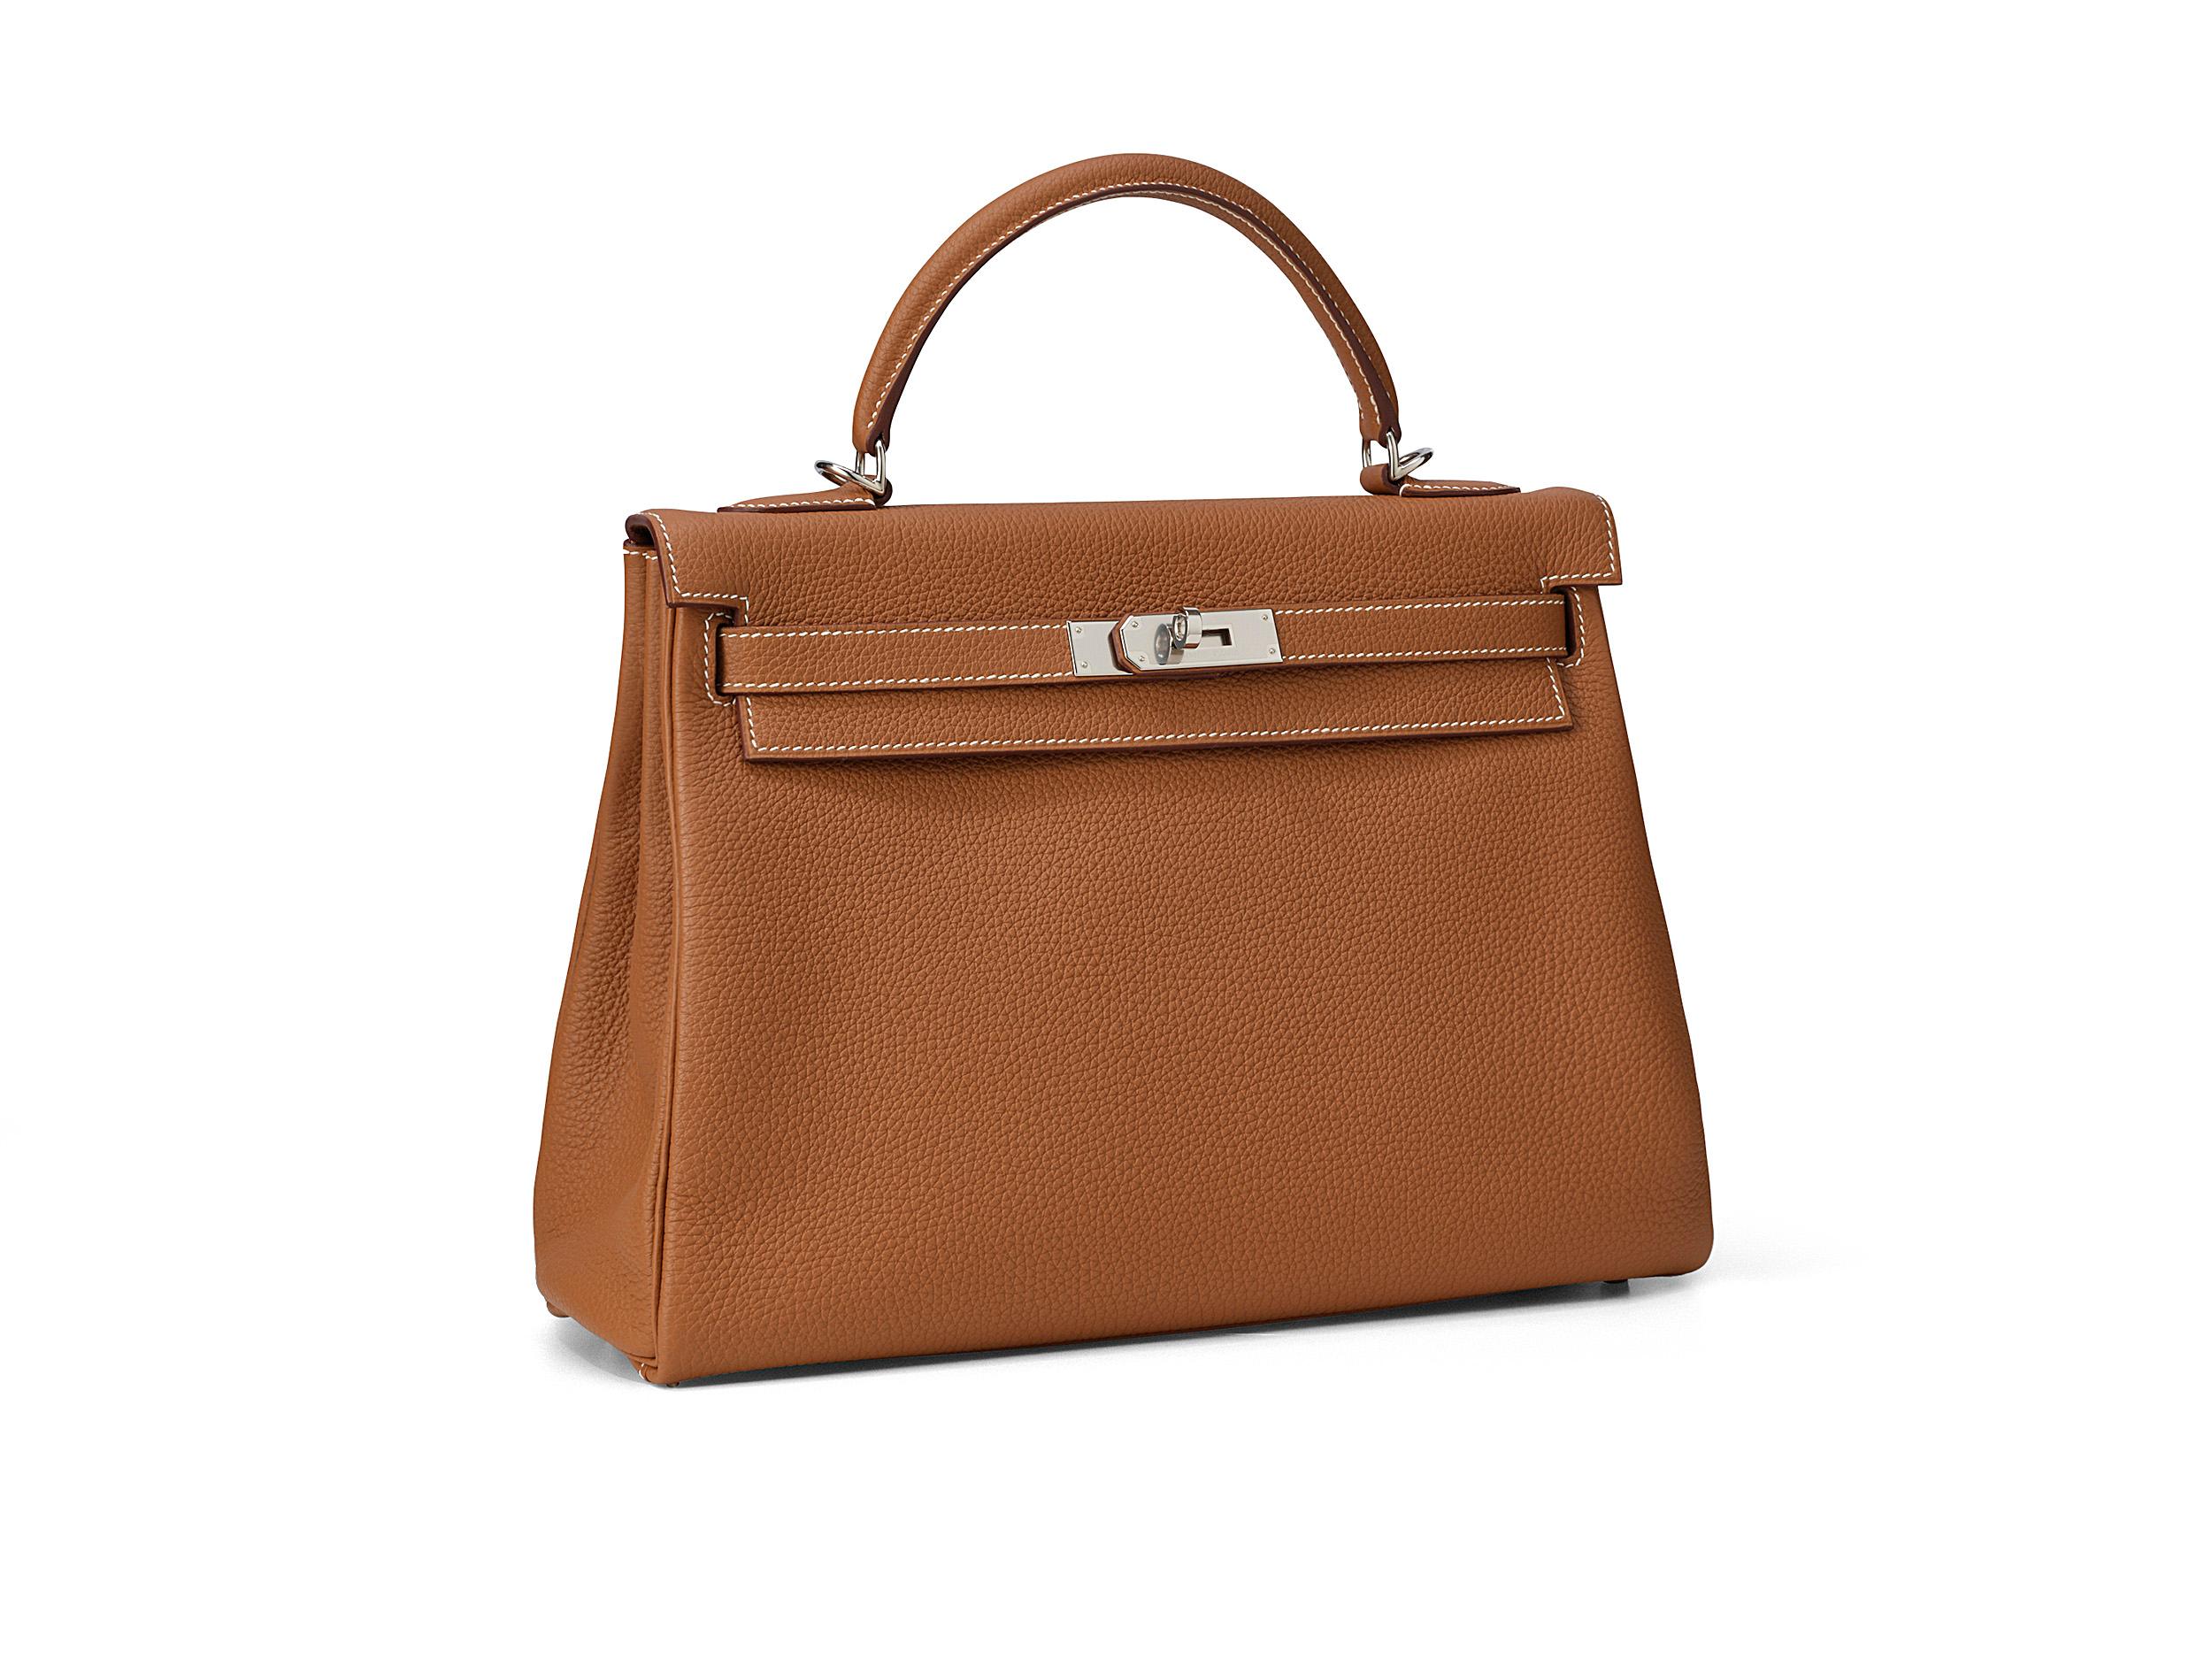 Hermès Kelly 32 in gold and togo leather with palladium hardware. The bag is unworn and comes as full set including the original receipt.
Stamp Y (2020) 

